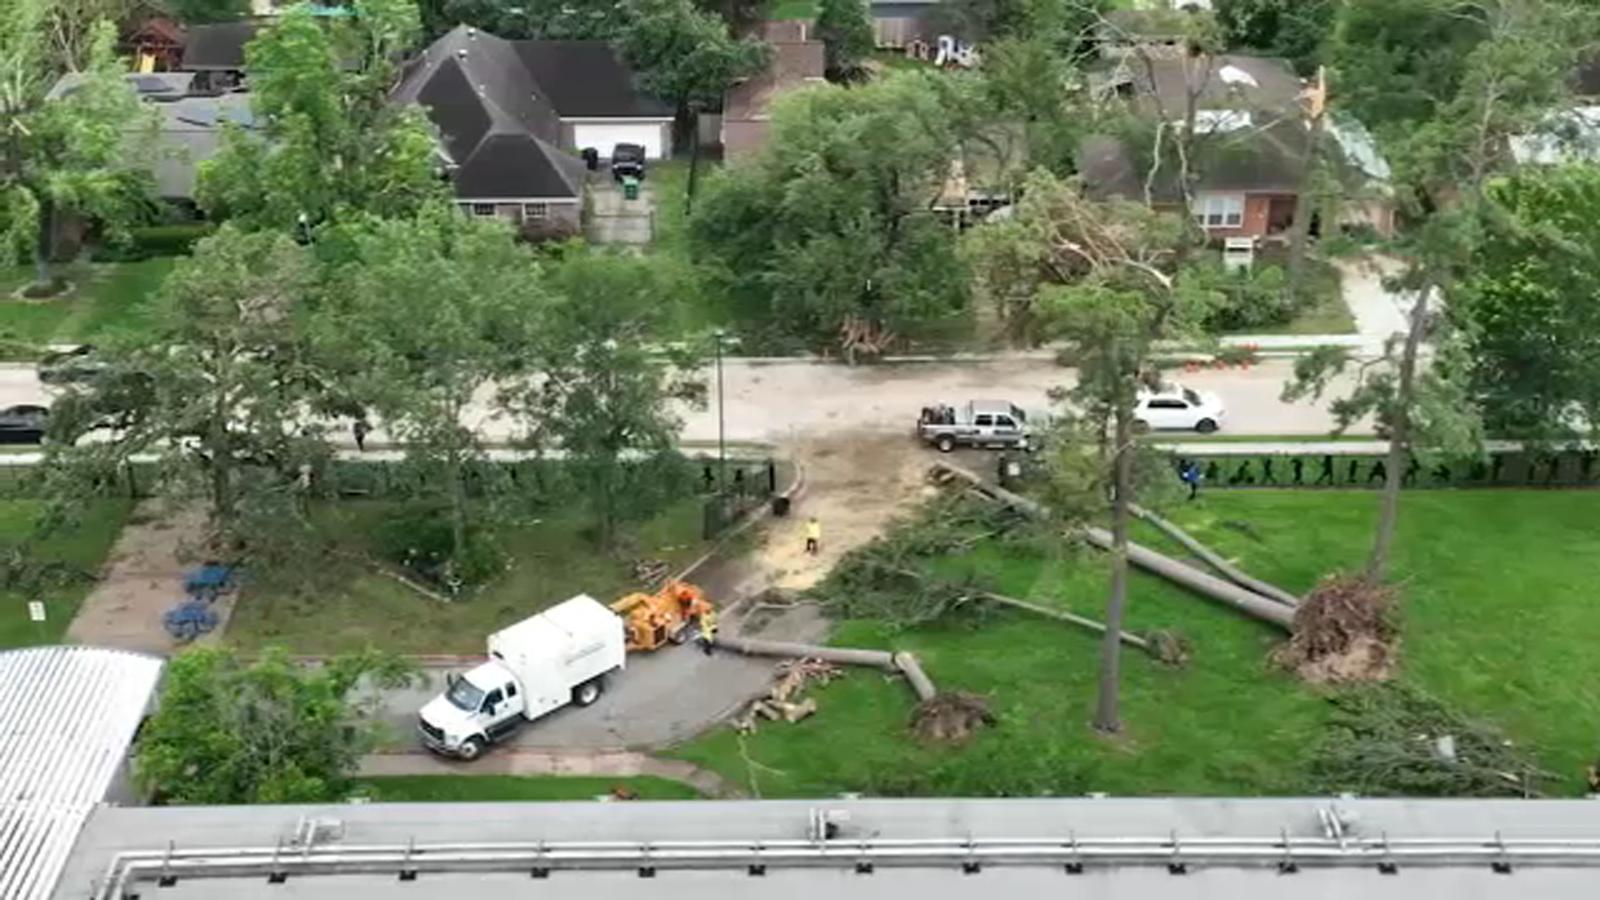 HISD storm damage: 90 Houston schools without power, Sunday decision to determine reopening [Video]